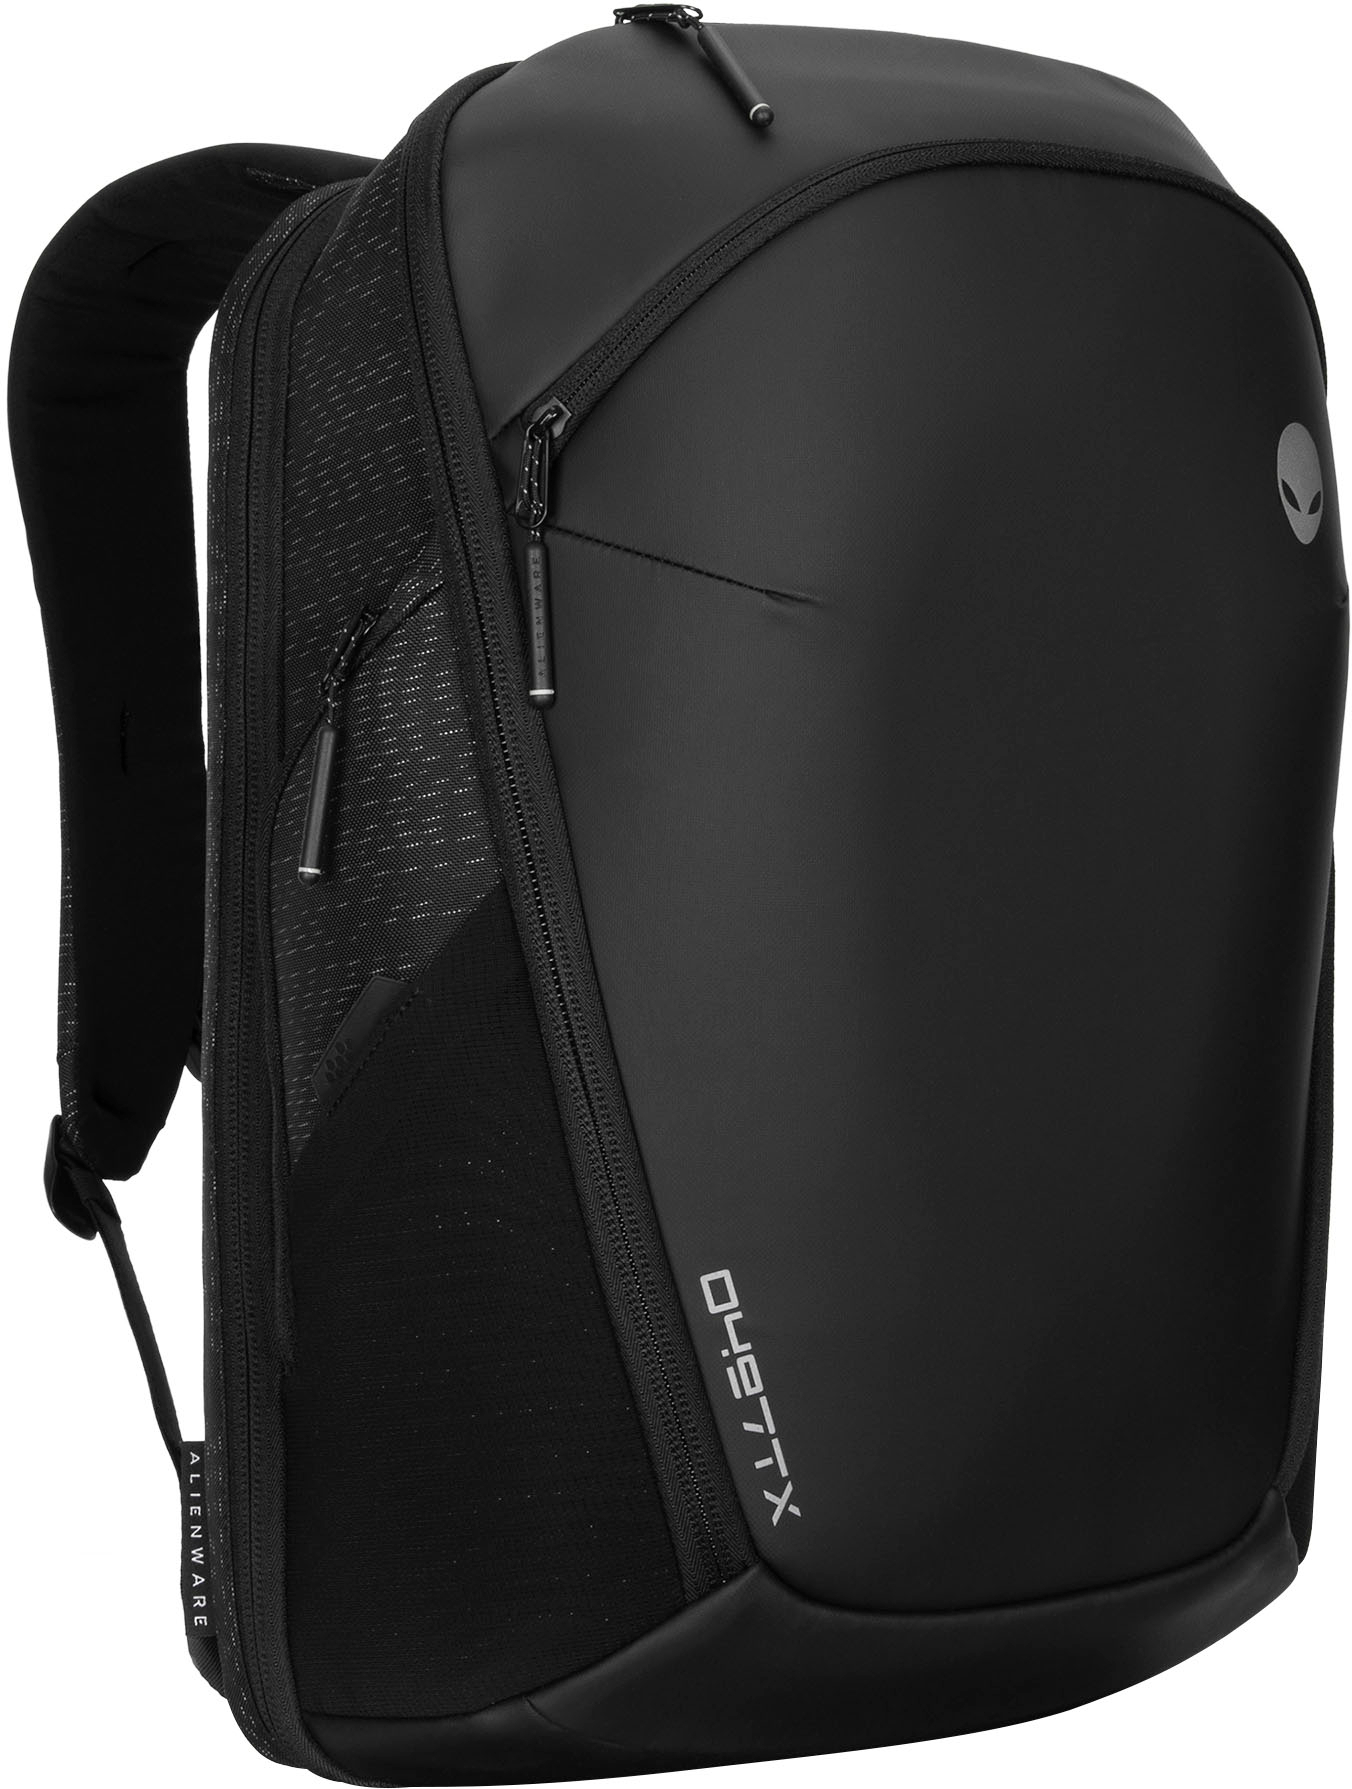 Left View: Dell - Alienware Horizon Travel Backpack (Front pocket, 2 x side zippered pockets, 2 x side mesh pockets, small accessories) - GalaxyWeave Black